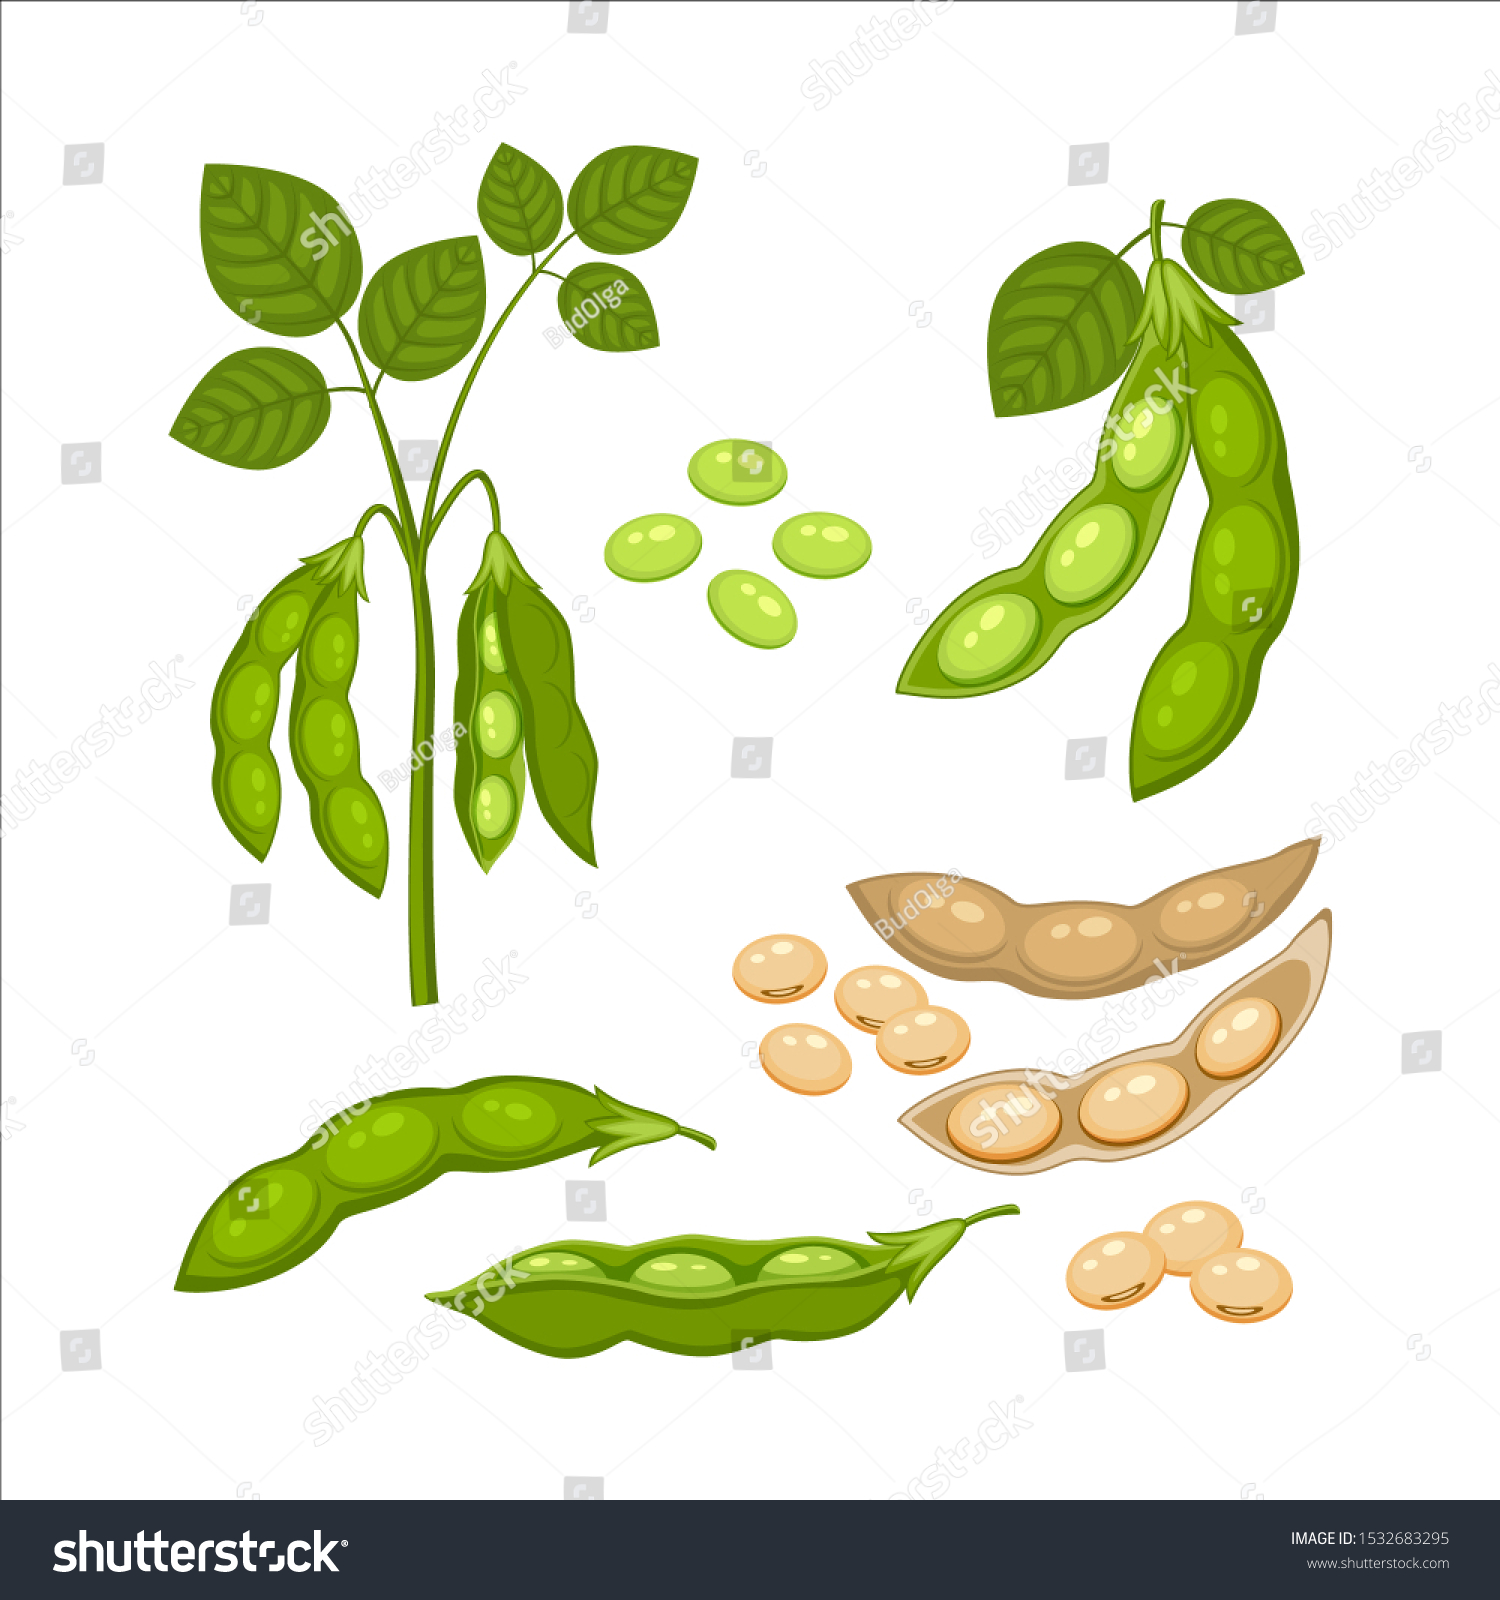 Set of Soy bean plant with ripe pods and  green leaves, whole and half green and dry brown  pods, soy seeds  isolated on white background. Bush of legume plant in a cartoon flat style. #1532683295